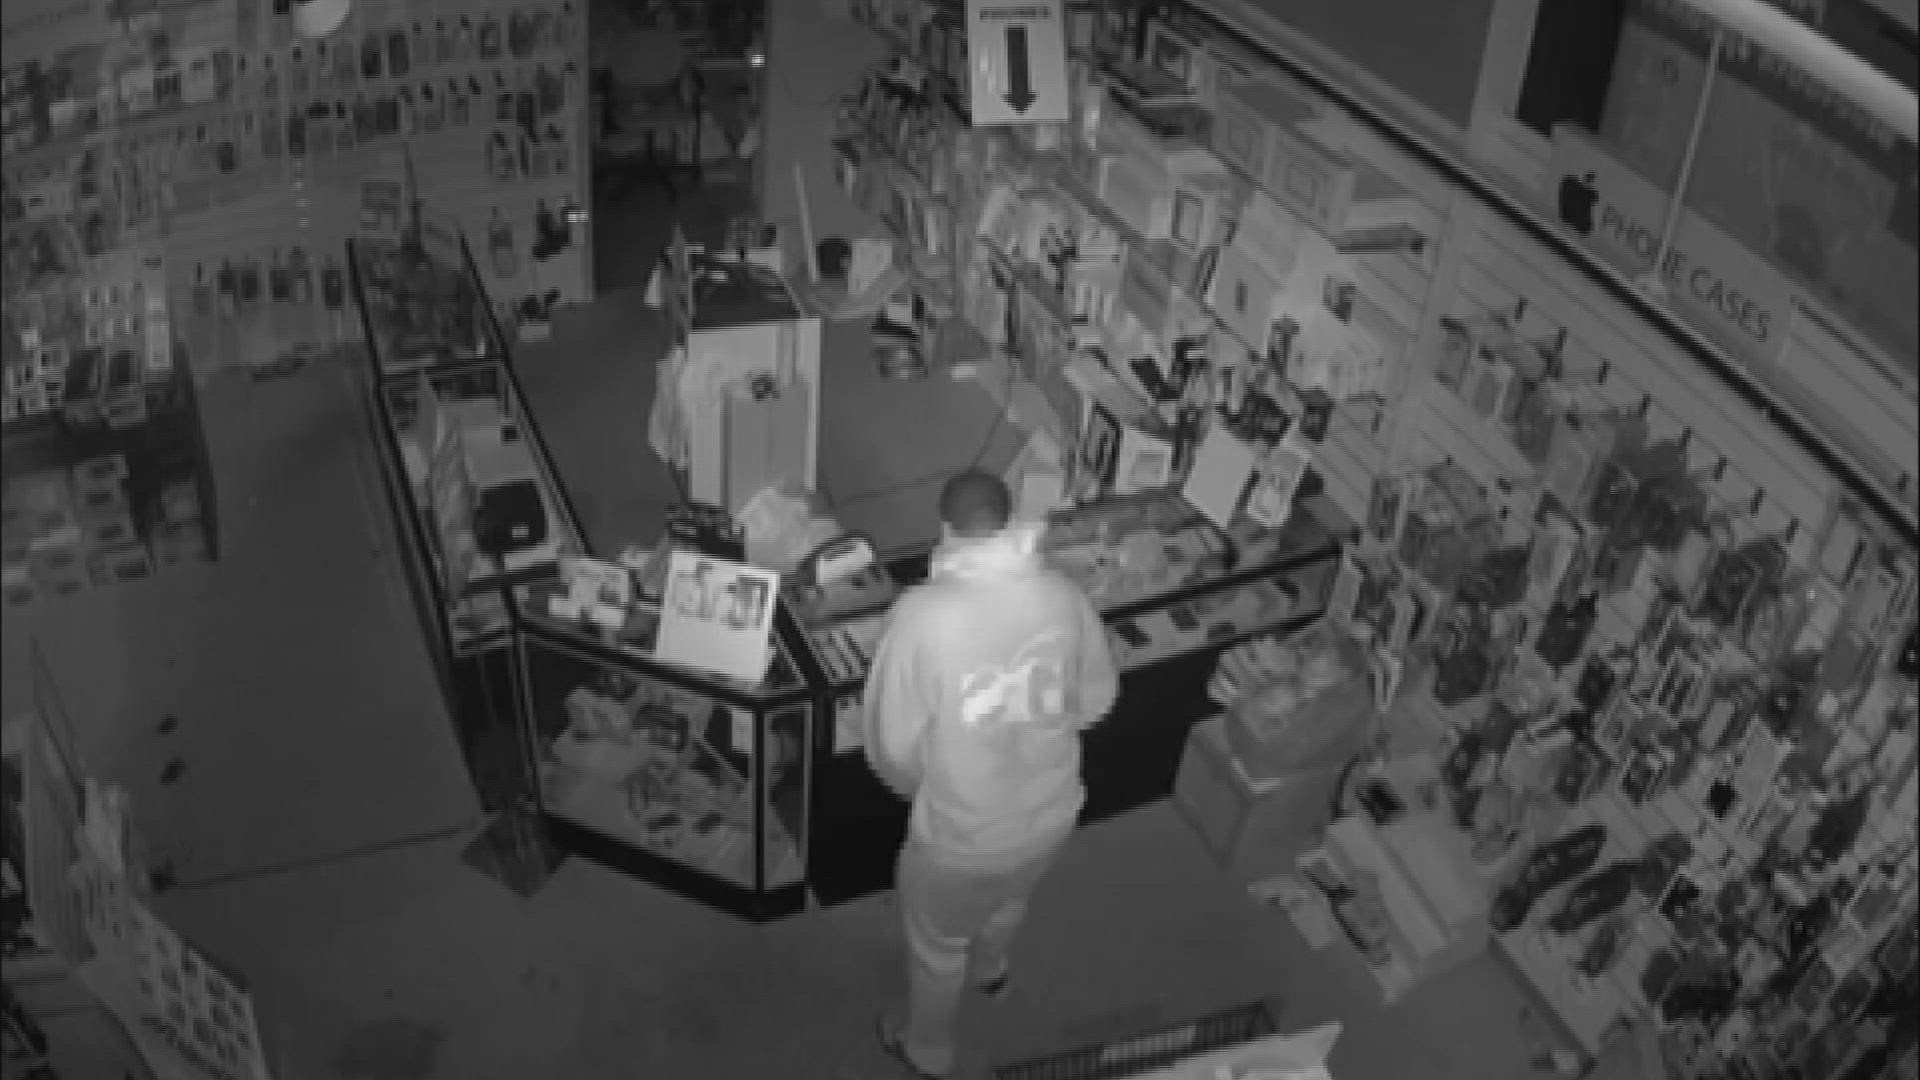 Better Buy, located in Northland Plaza, says a burglar has raided their store four times. The business has lost about $50,000.